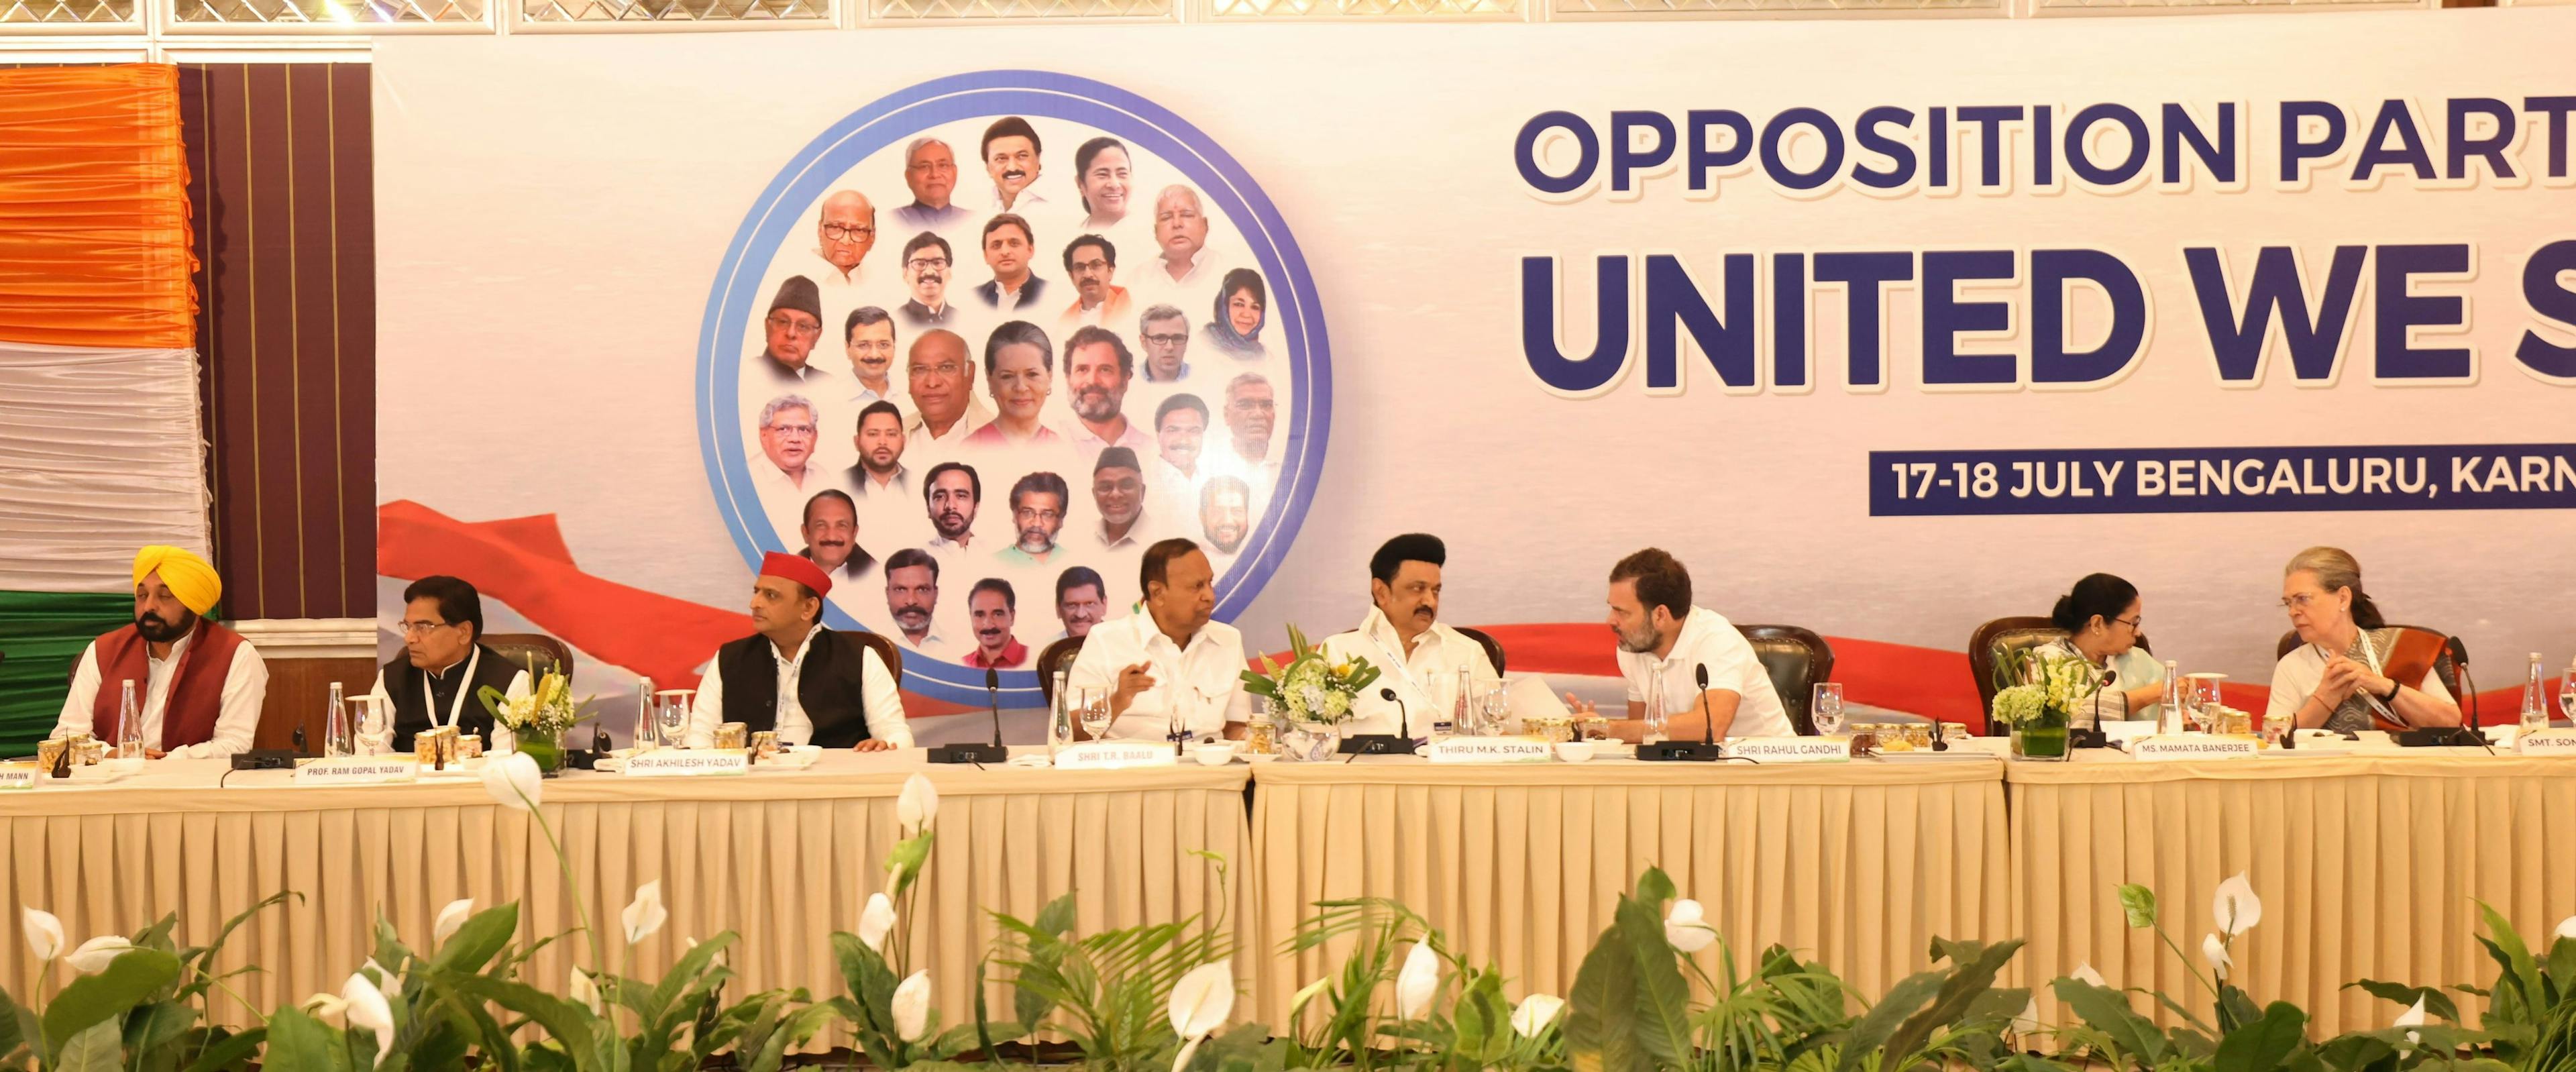 Indian Opposition Parties Form an Alliance